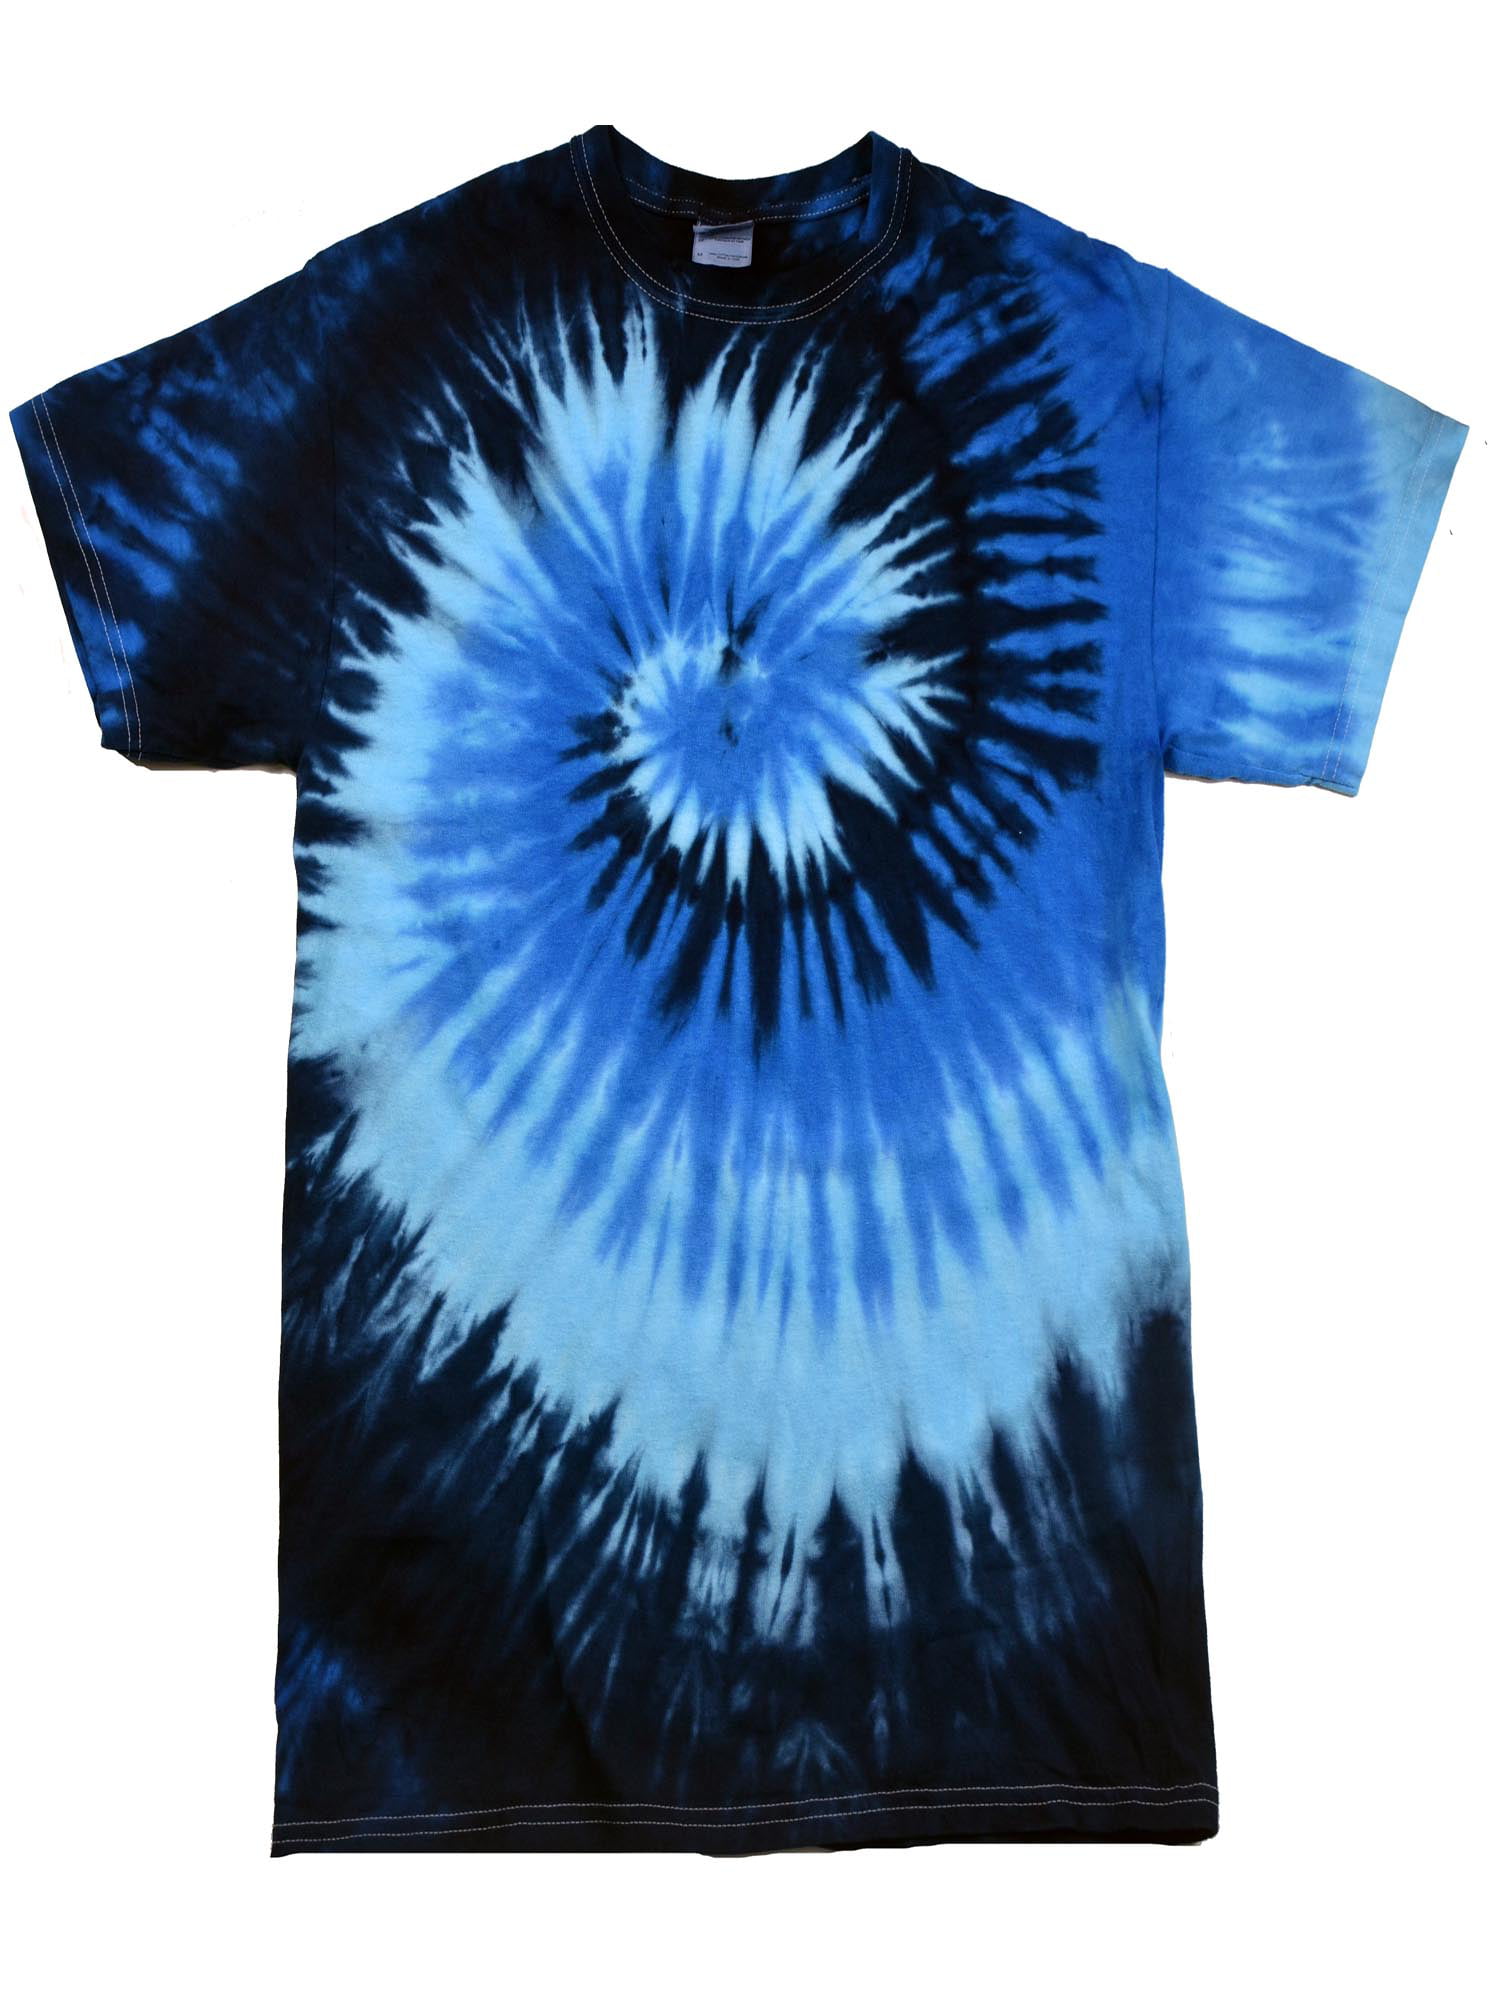 Tie Dye T-shirts Swirl Multi Colors Adult S to 5XL 100% Cotton ...